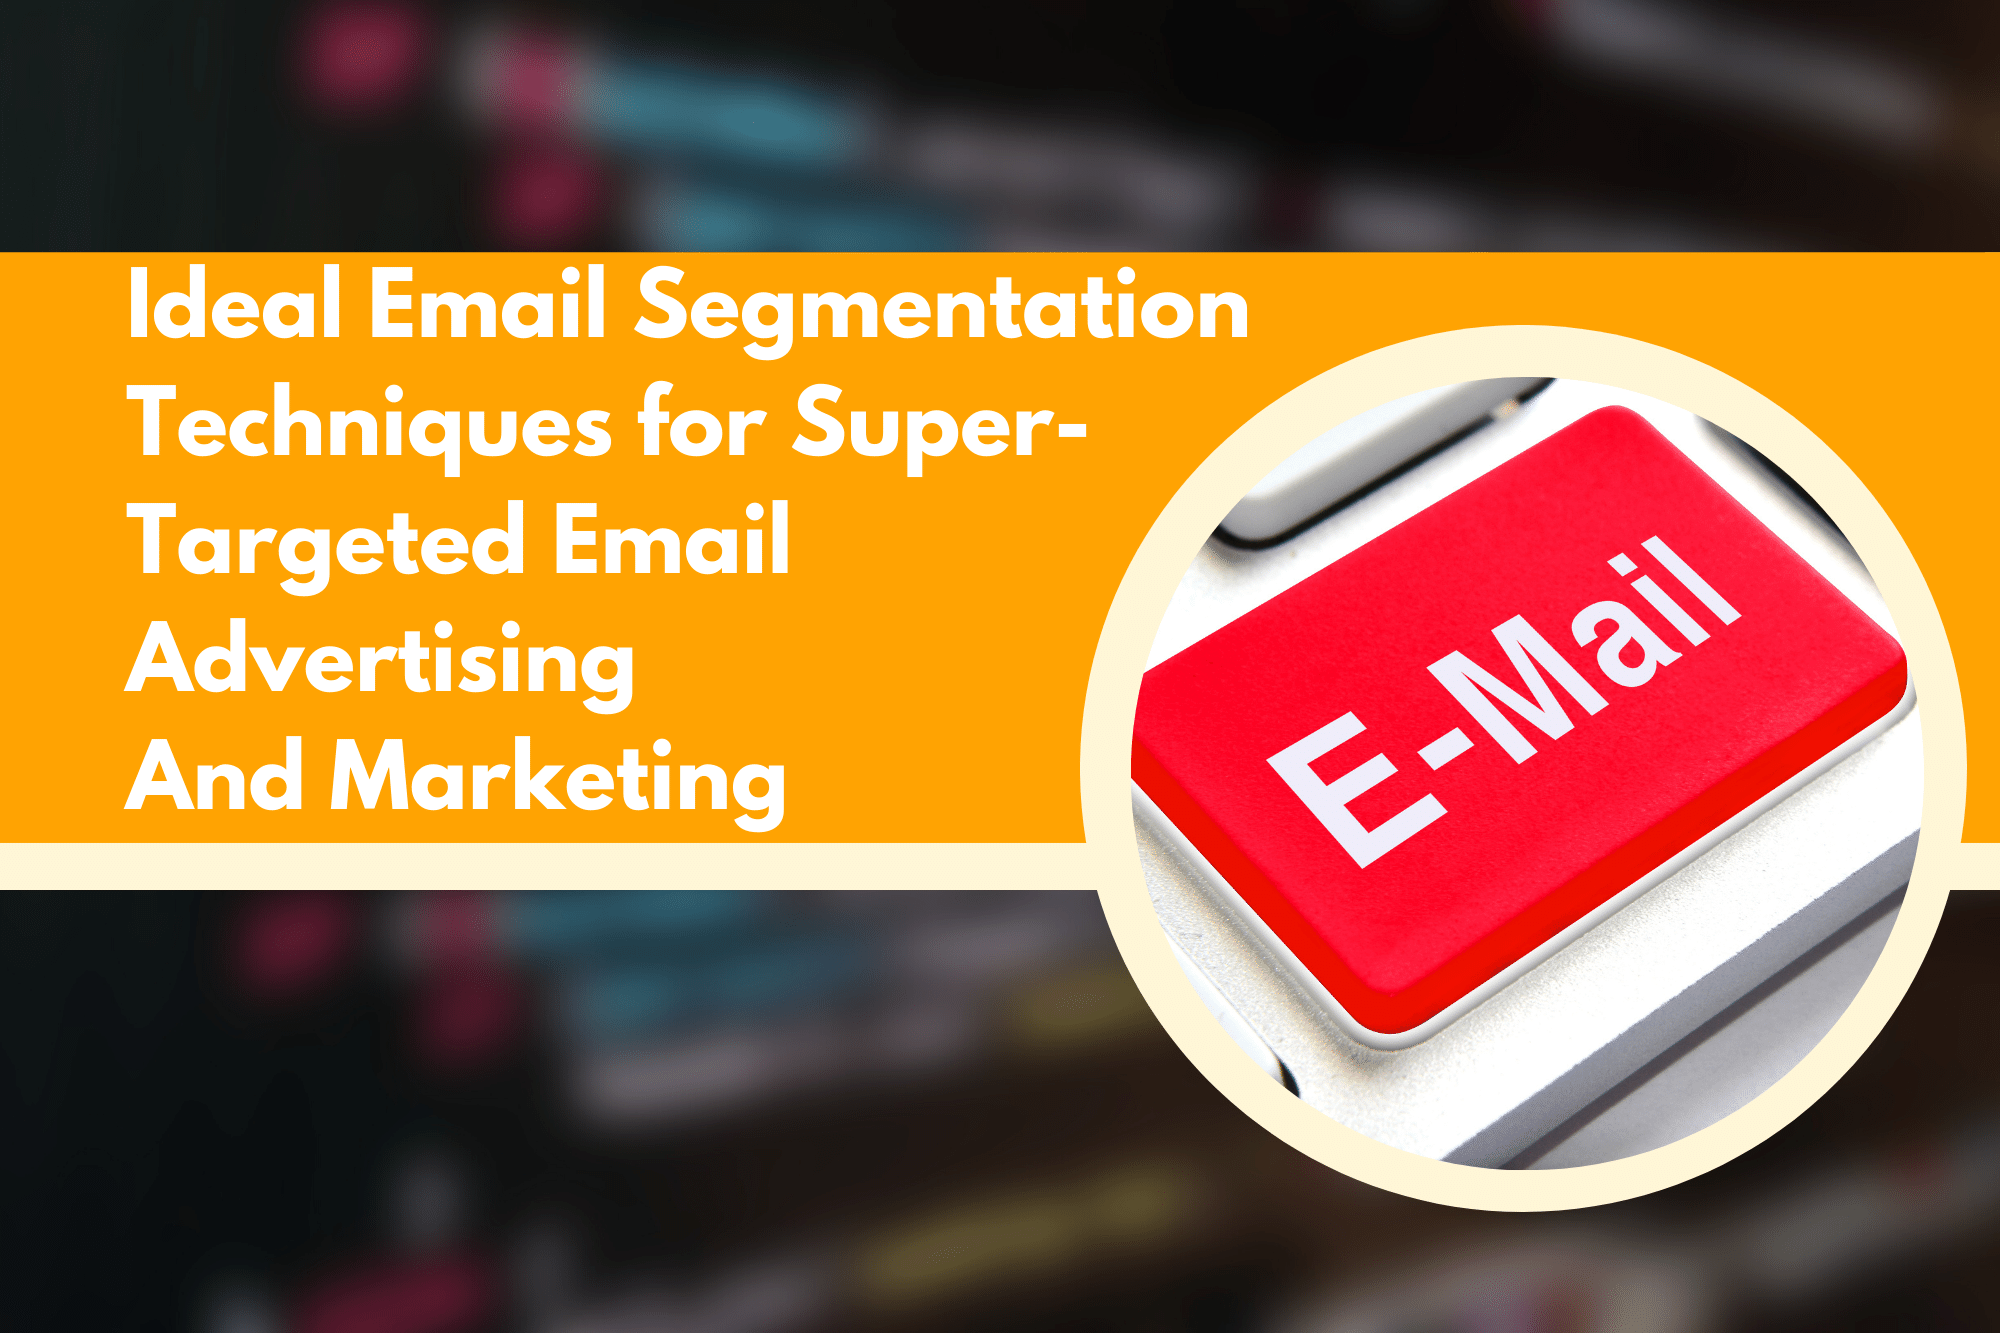 Ideal Email Segmentation Techniques for Super-Targeted Email Advertising And Marketing